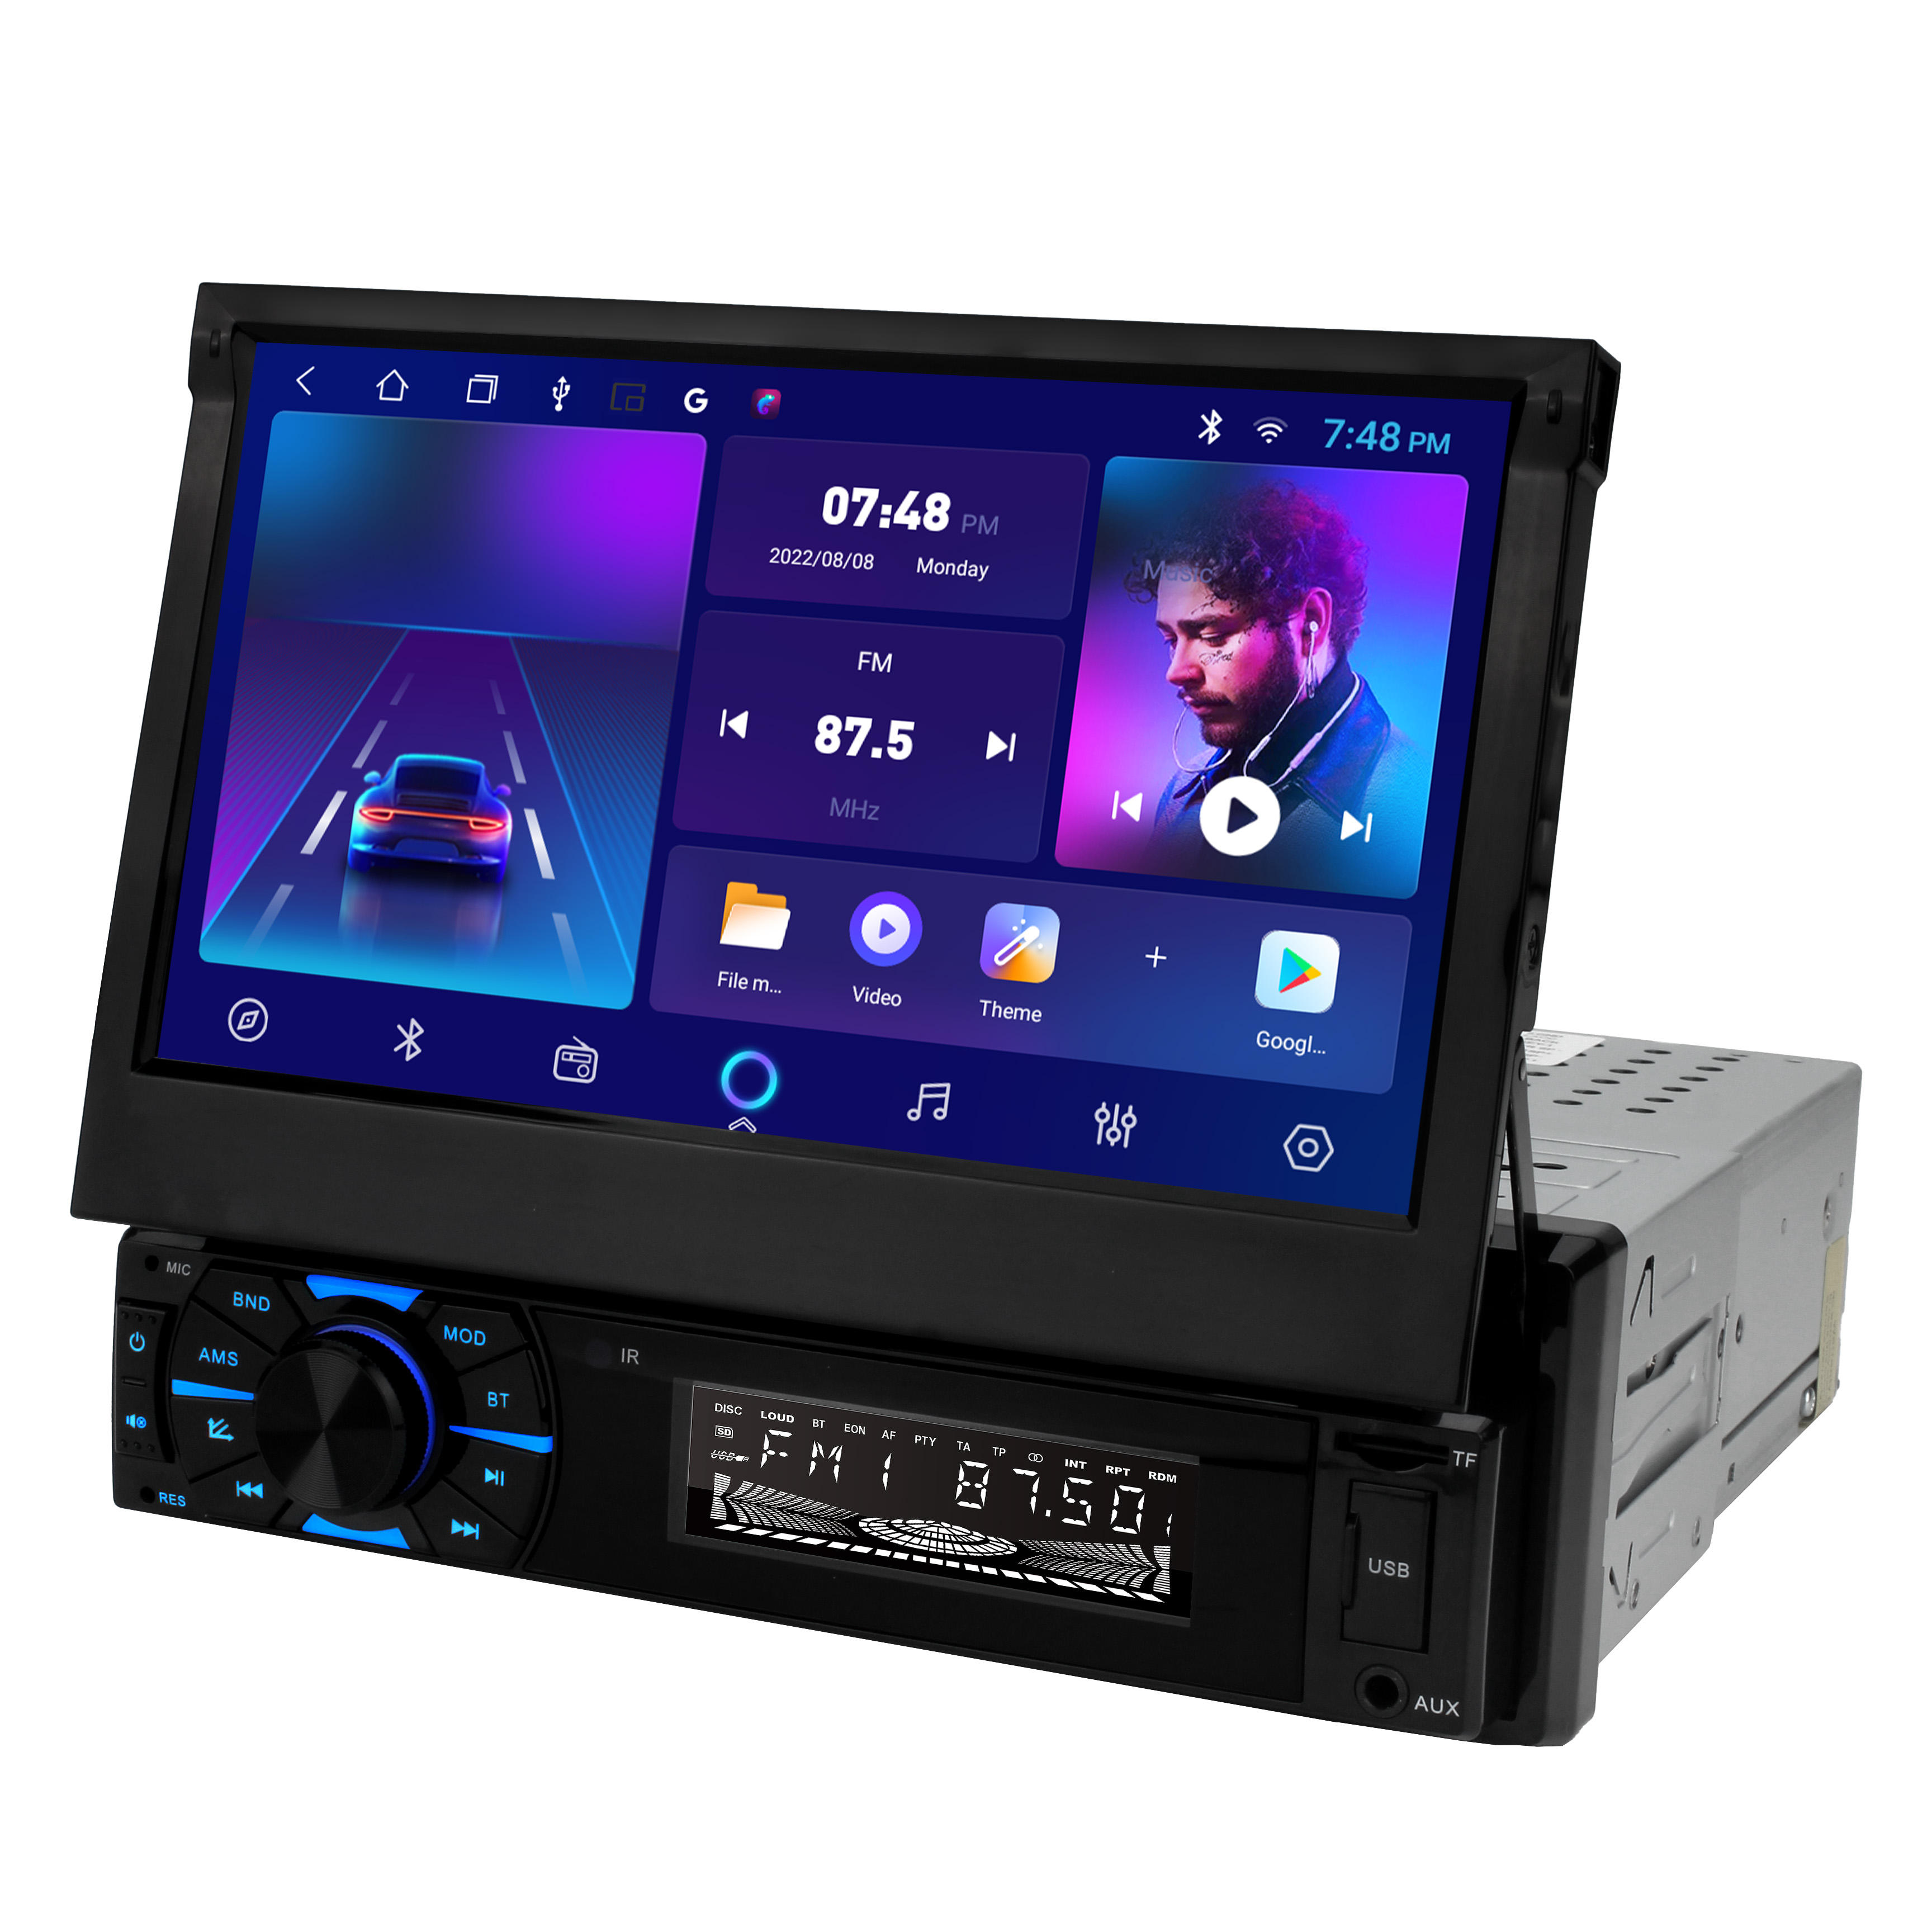 1+16/2+32 1 Din Android Car Radio Auto Radio 7" Retractable Touch Screen GPS Wifi BT FM RDS AUX Stereo Auto Radio